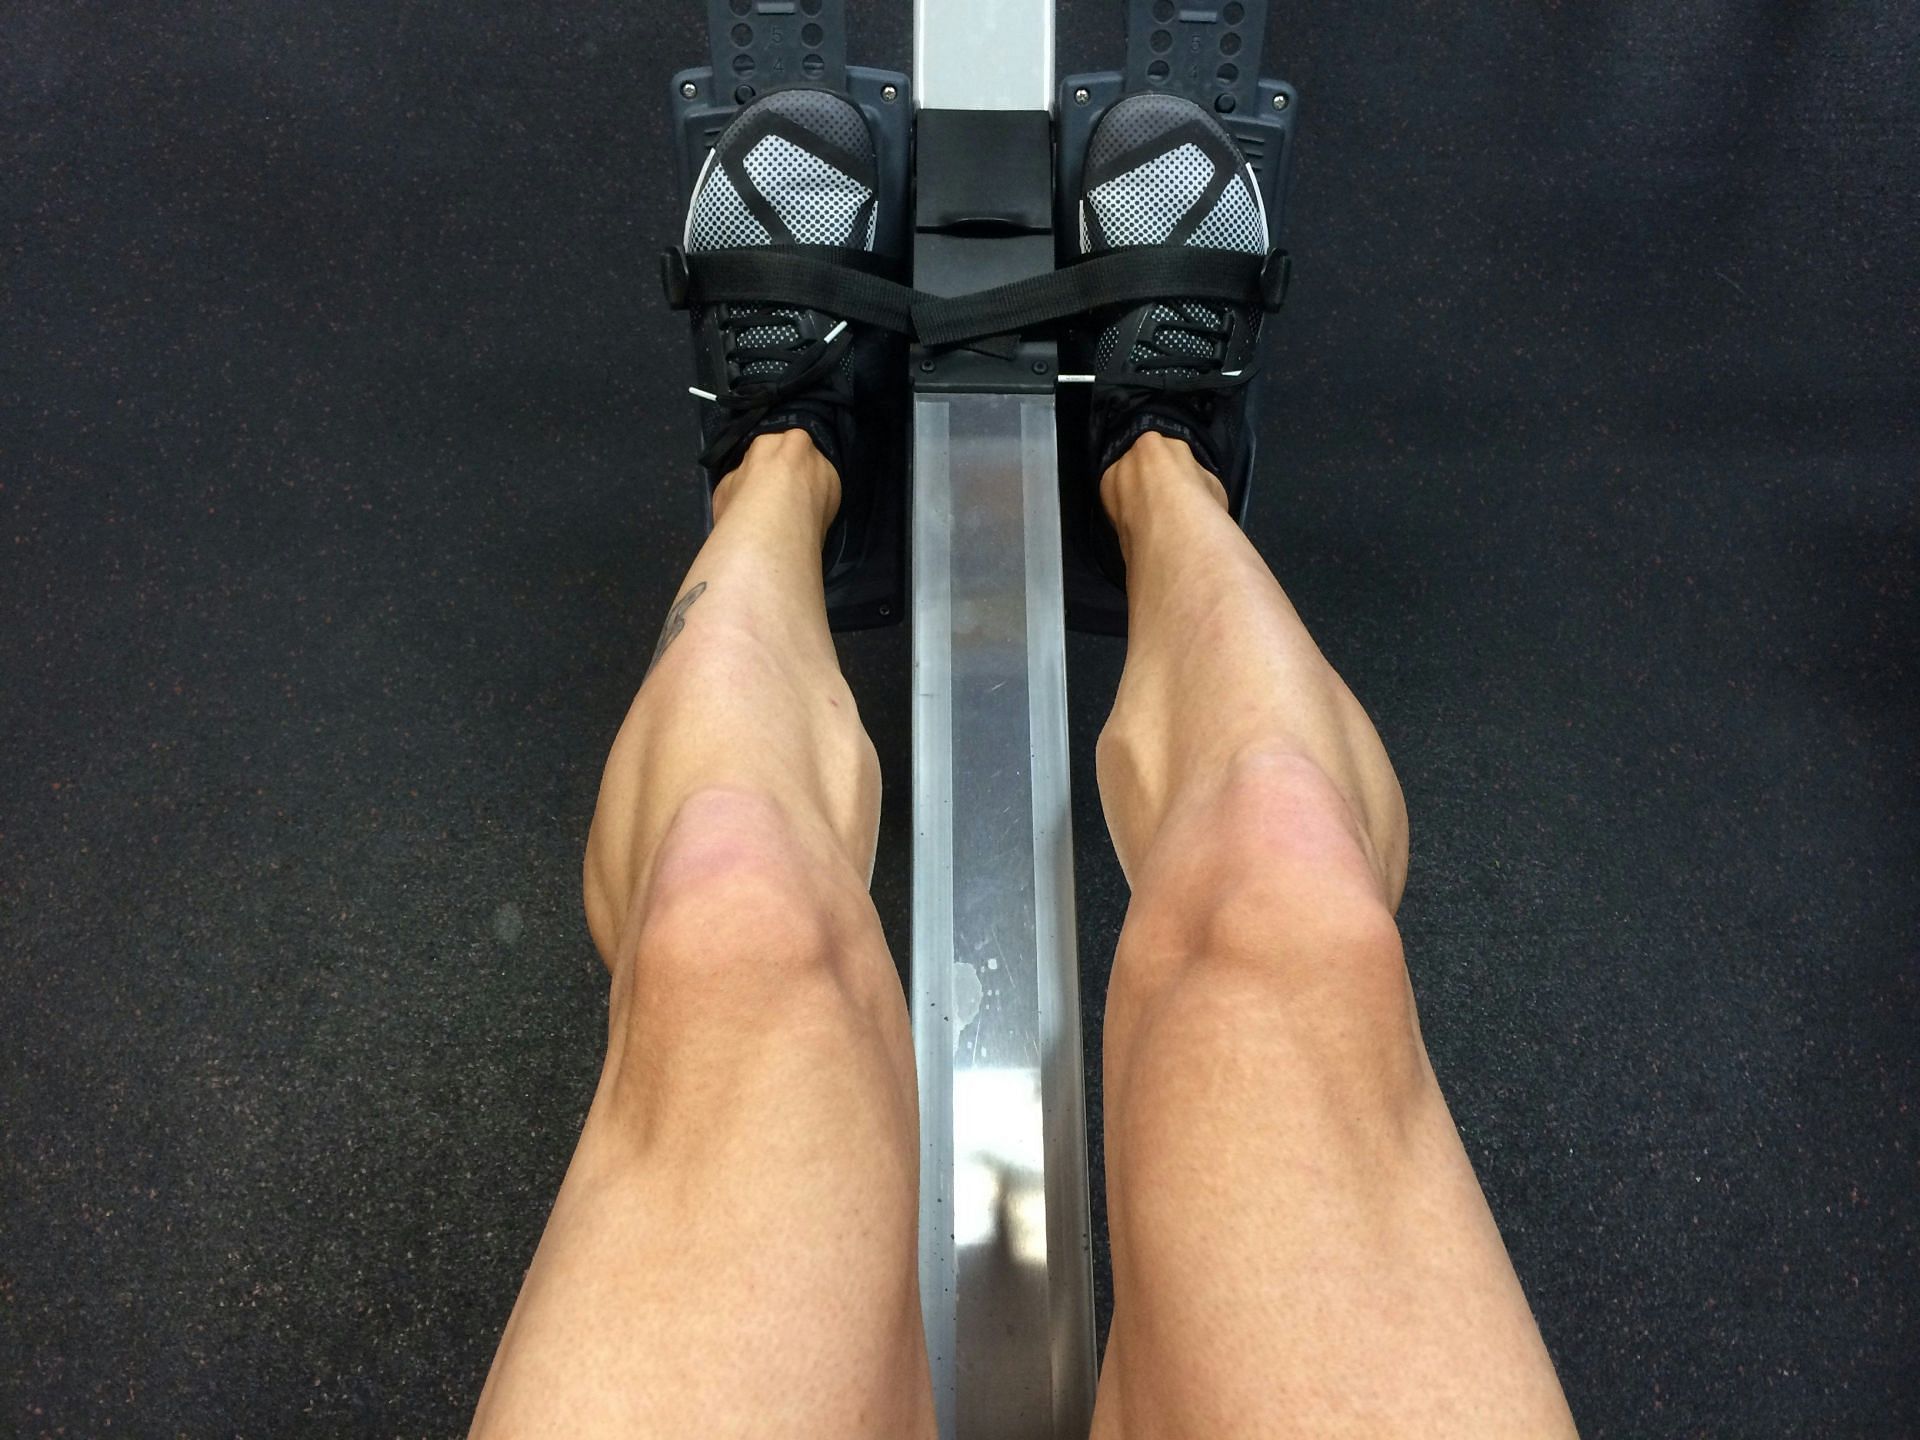 Rowing for full body workout (Image by Kyle Kranz)